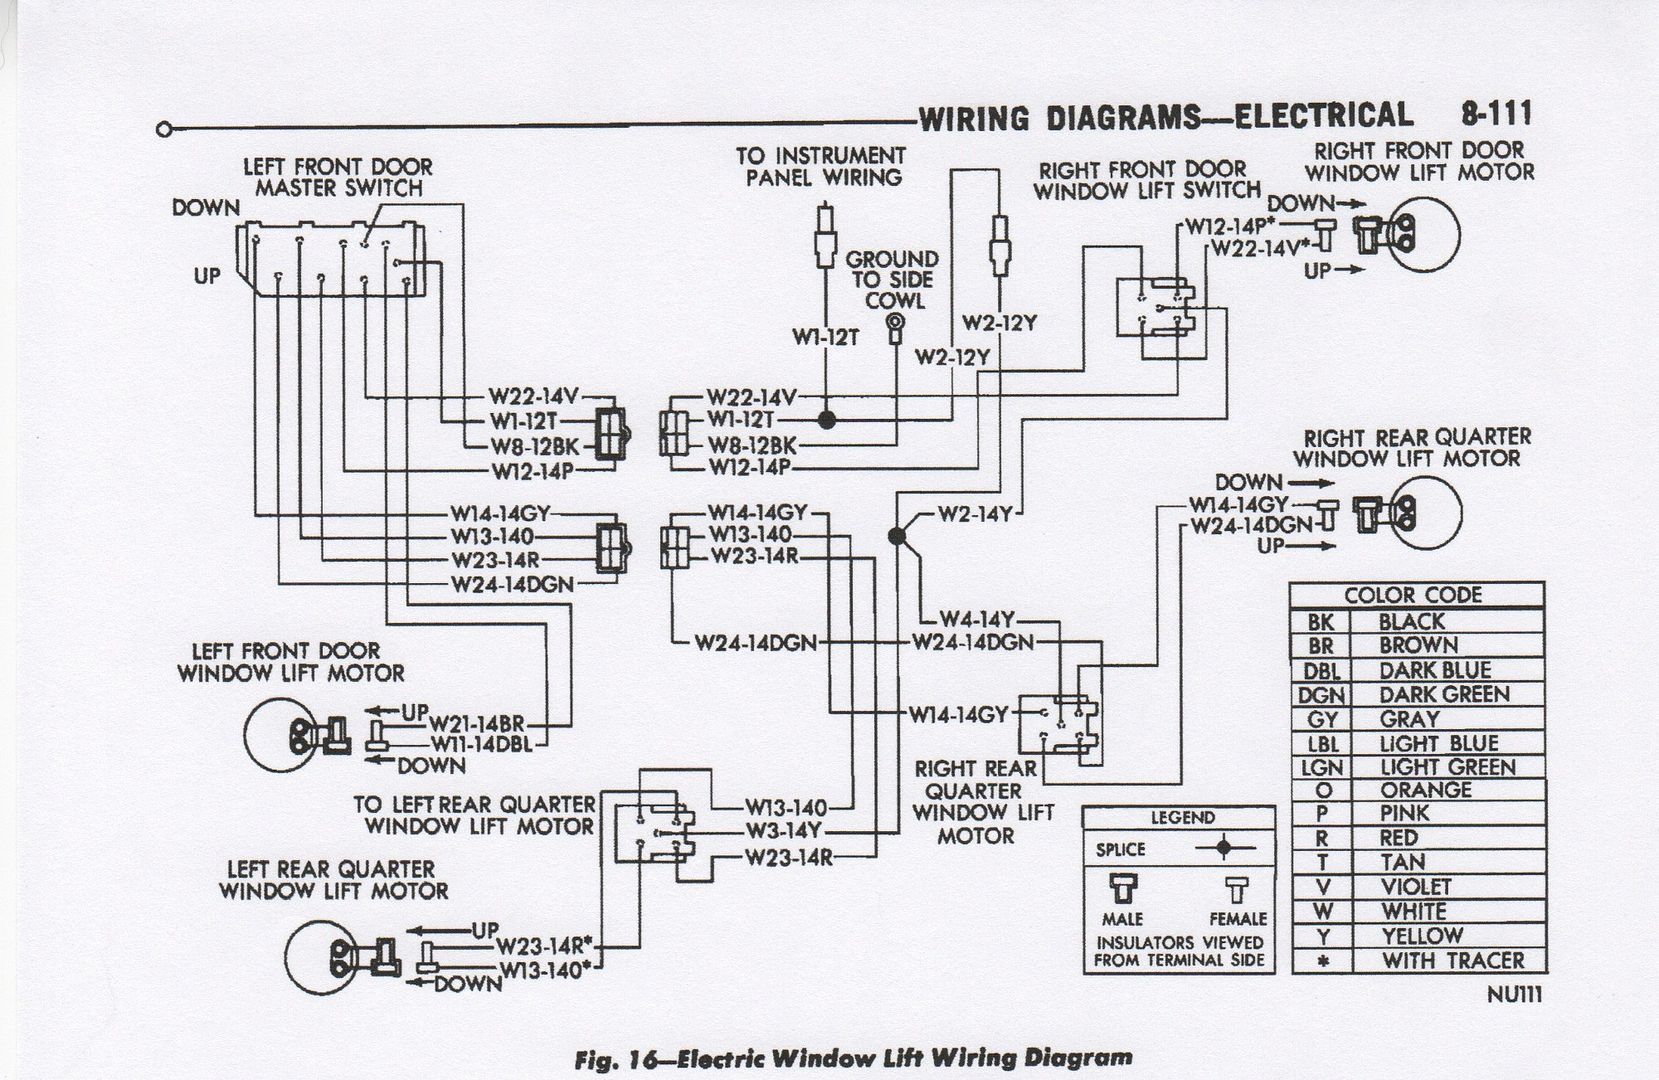 Vintage Power Window Systems? - Page 3 1969 dodge coronet wiring diagram 